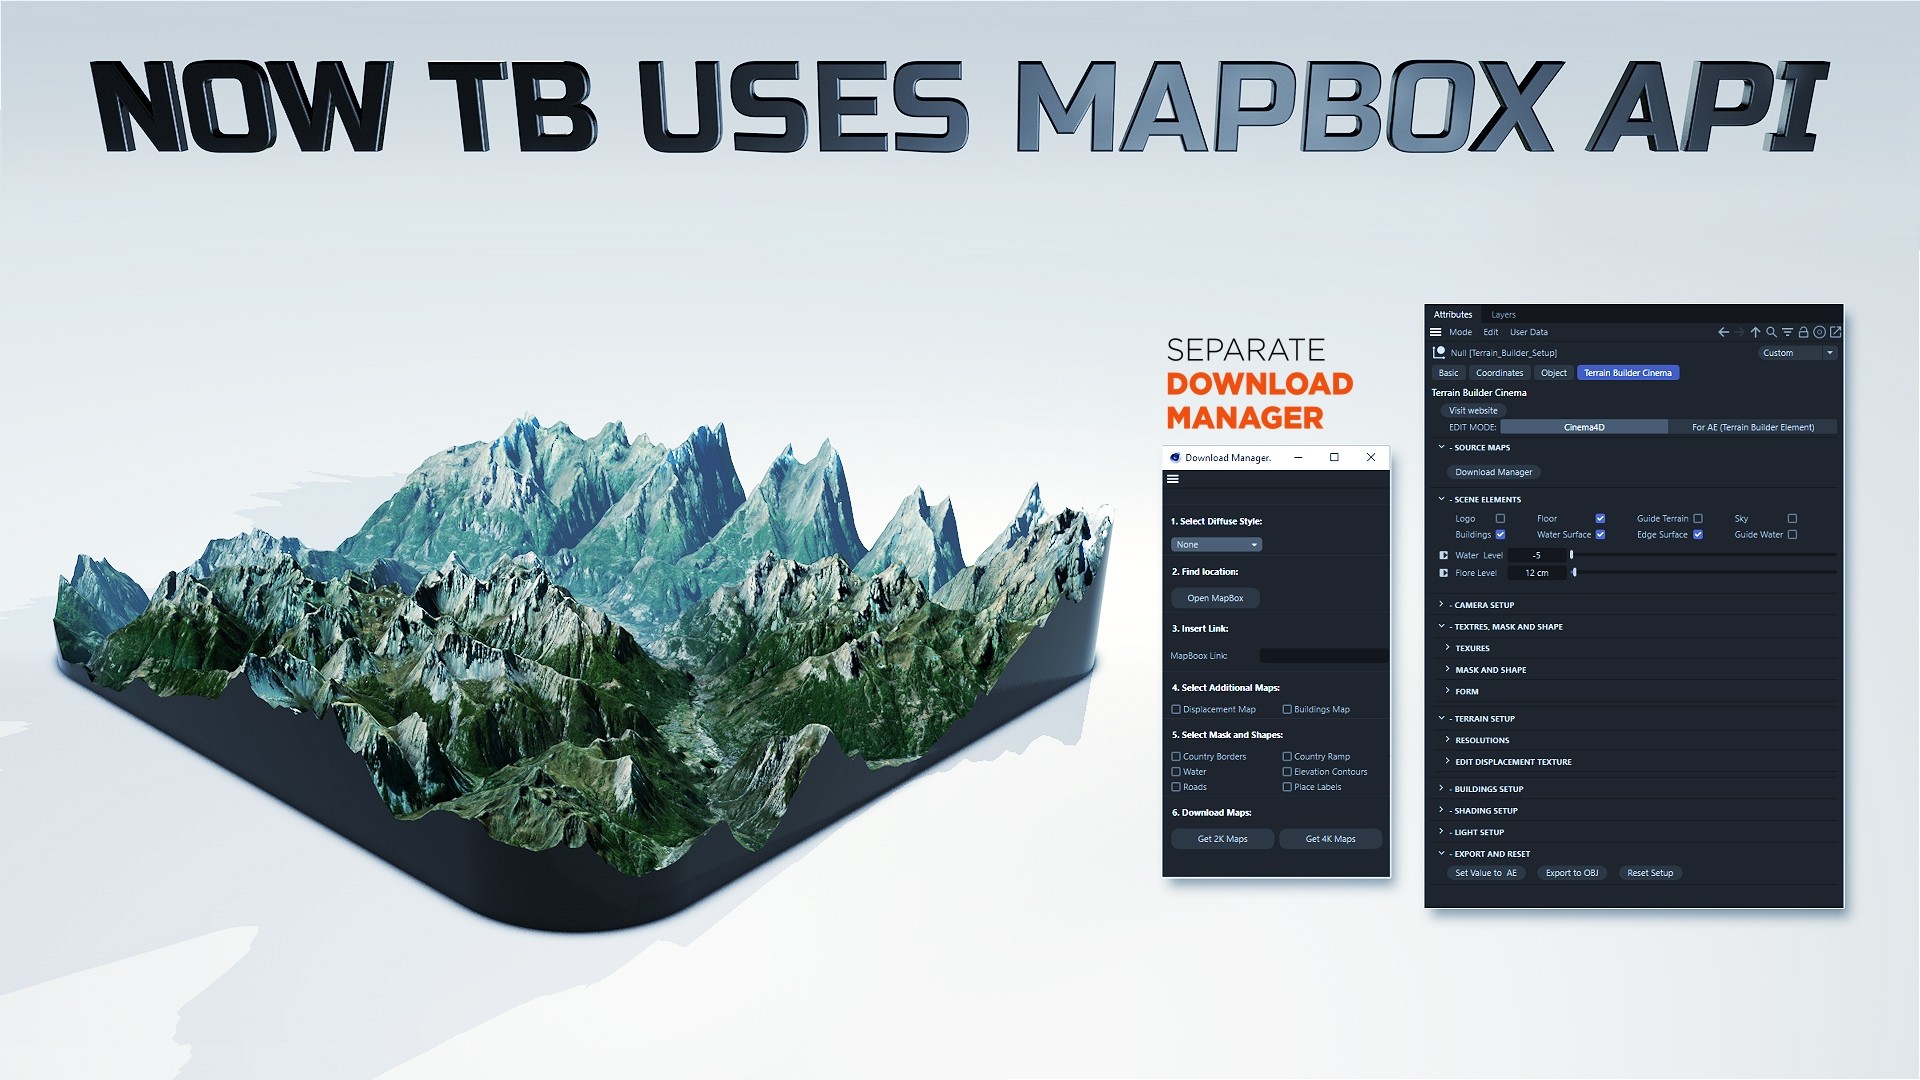 A user friendly interface will help you download all the necessary maps